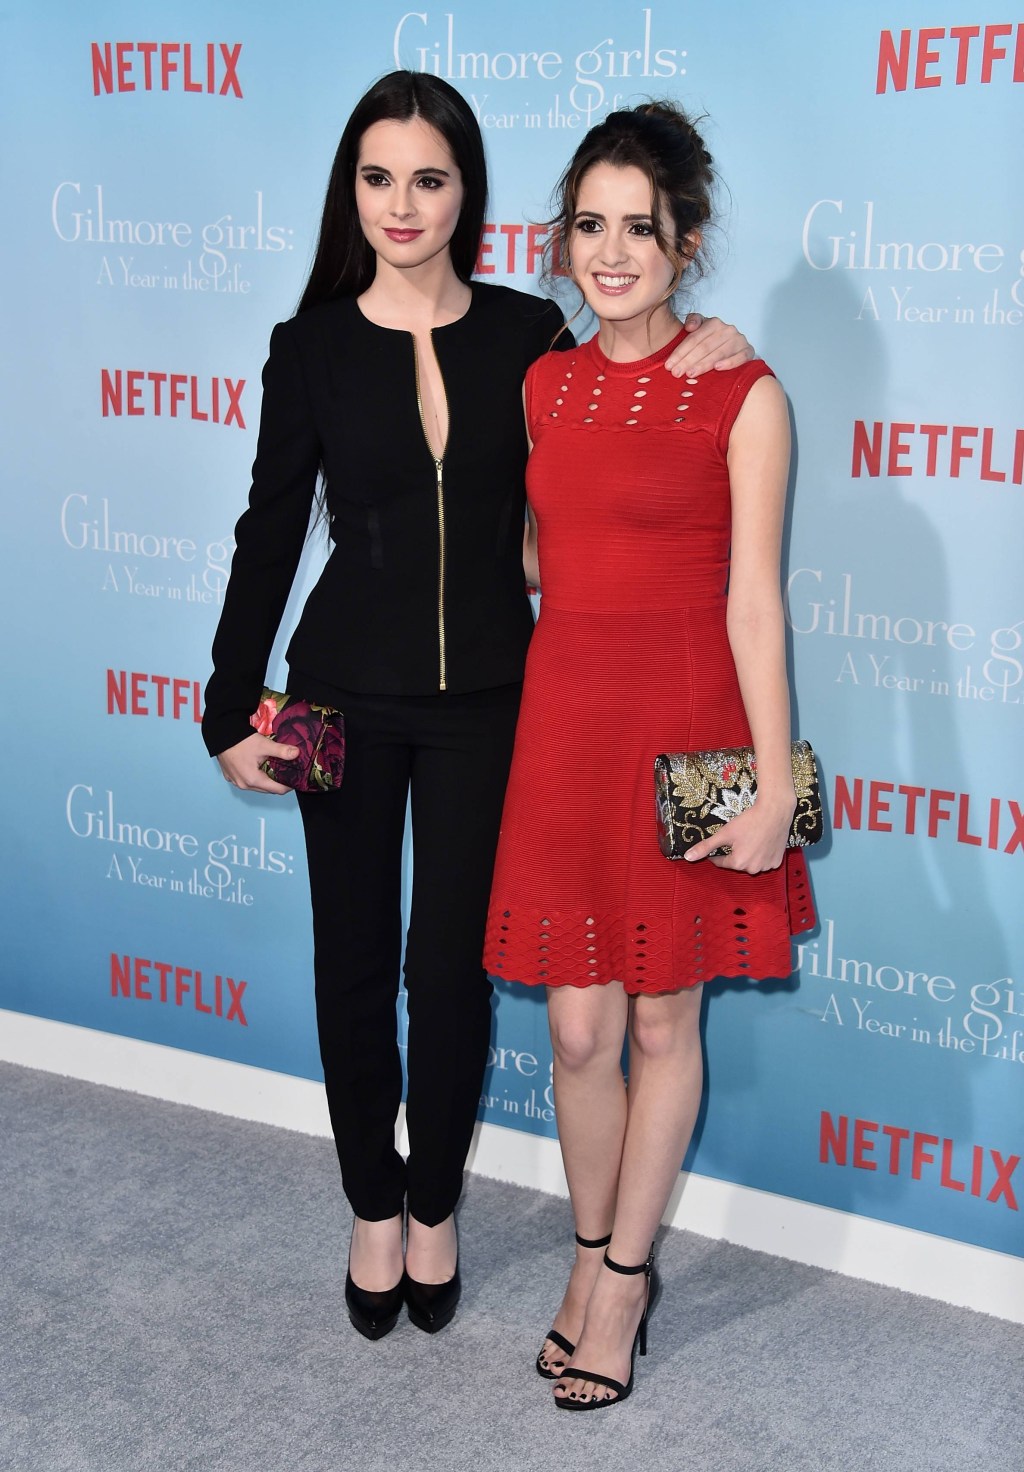 LOS ANGELES, CA - NOVEMBER 18: Actors Vanessa Marano and Laura Marano attend the premiere of Netflix's "Gilmore Girls: A Year In The Life" at the Regency Bruin Theatre on November 18, 2016 in Los Angeles, California. (Photo by Alberto E. Rodriguez/Getty Images)